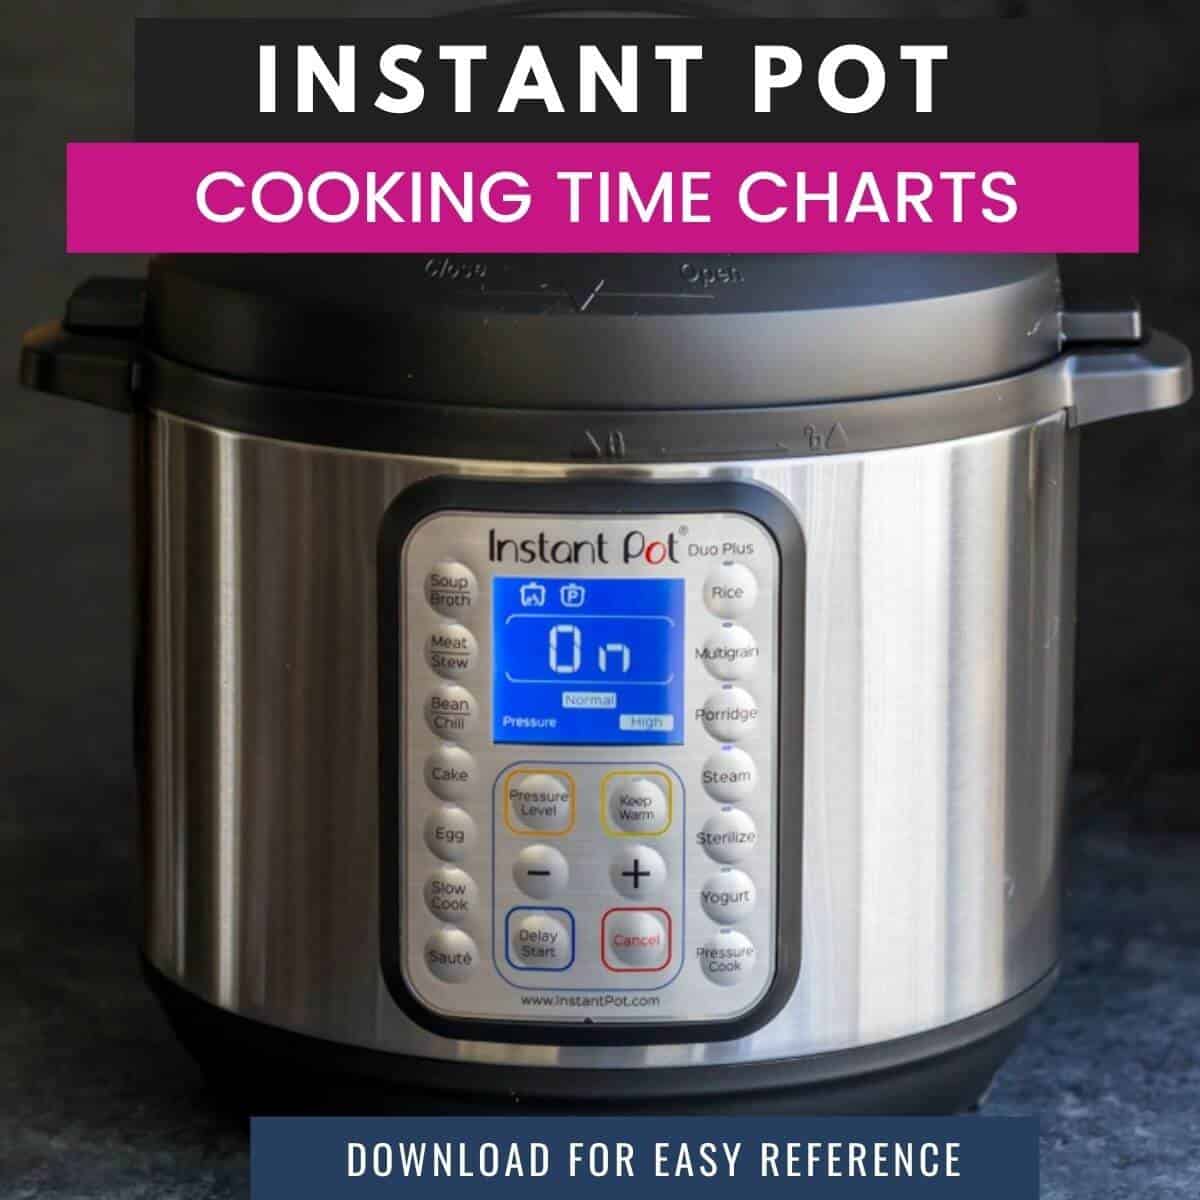 Instant Pot image with text overlay which reads Instant Pot Cooking Time Charts